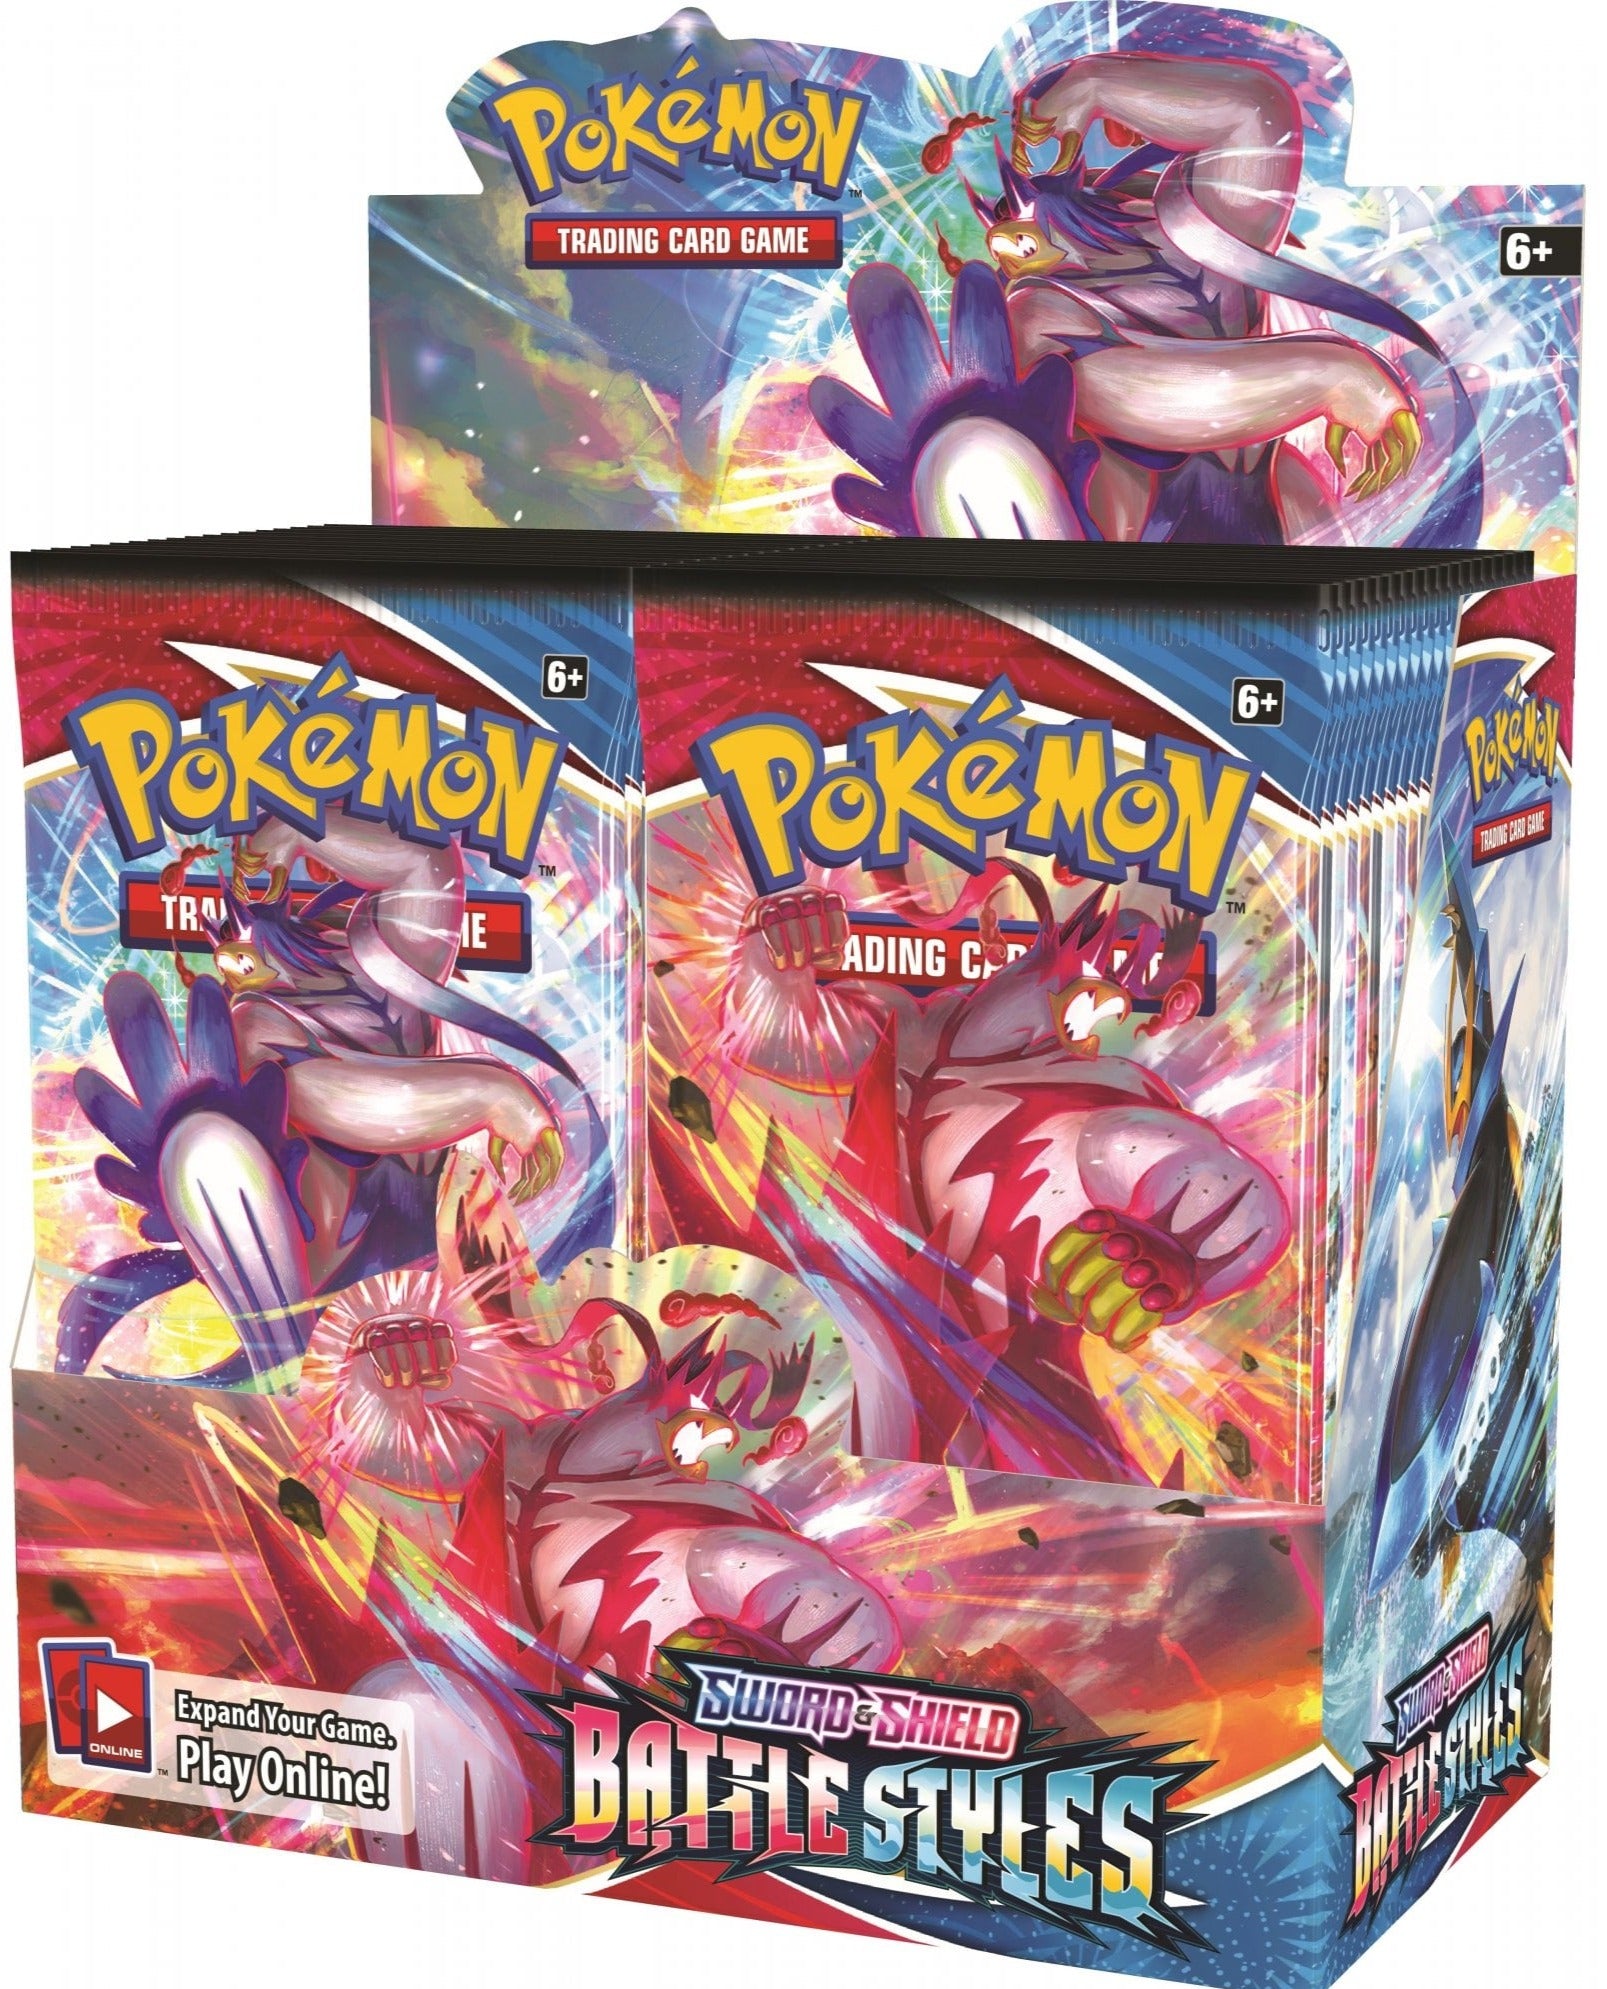 Pokémon Trading Card Game - Sword & Shield: Battle Styles - Booster Box | Viridian Forest